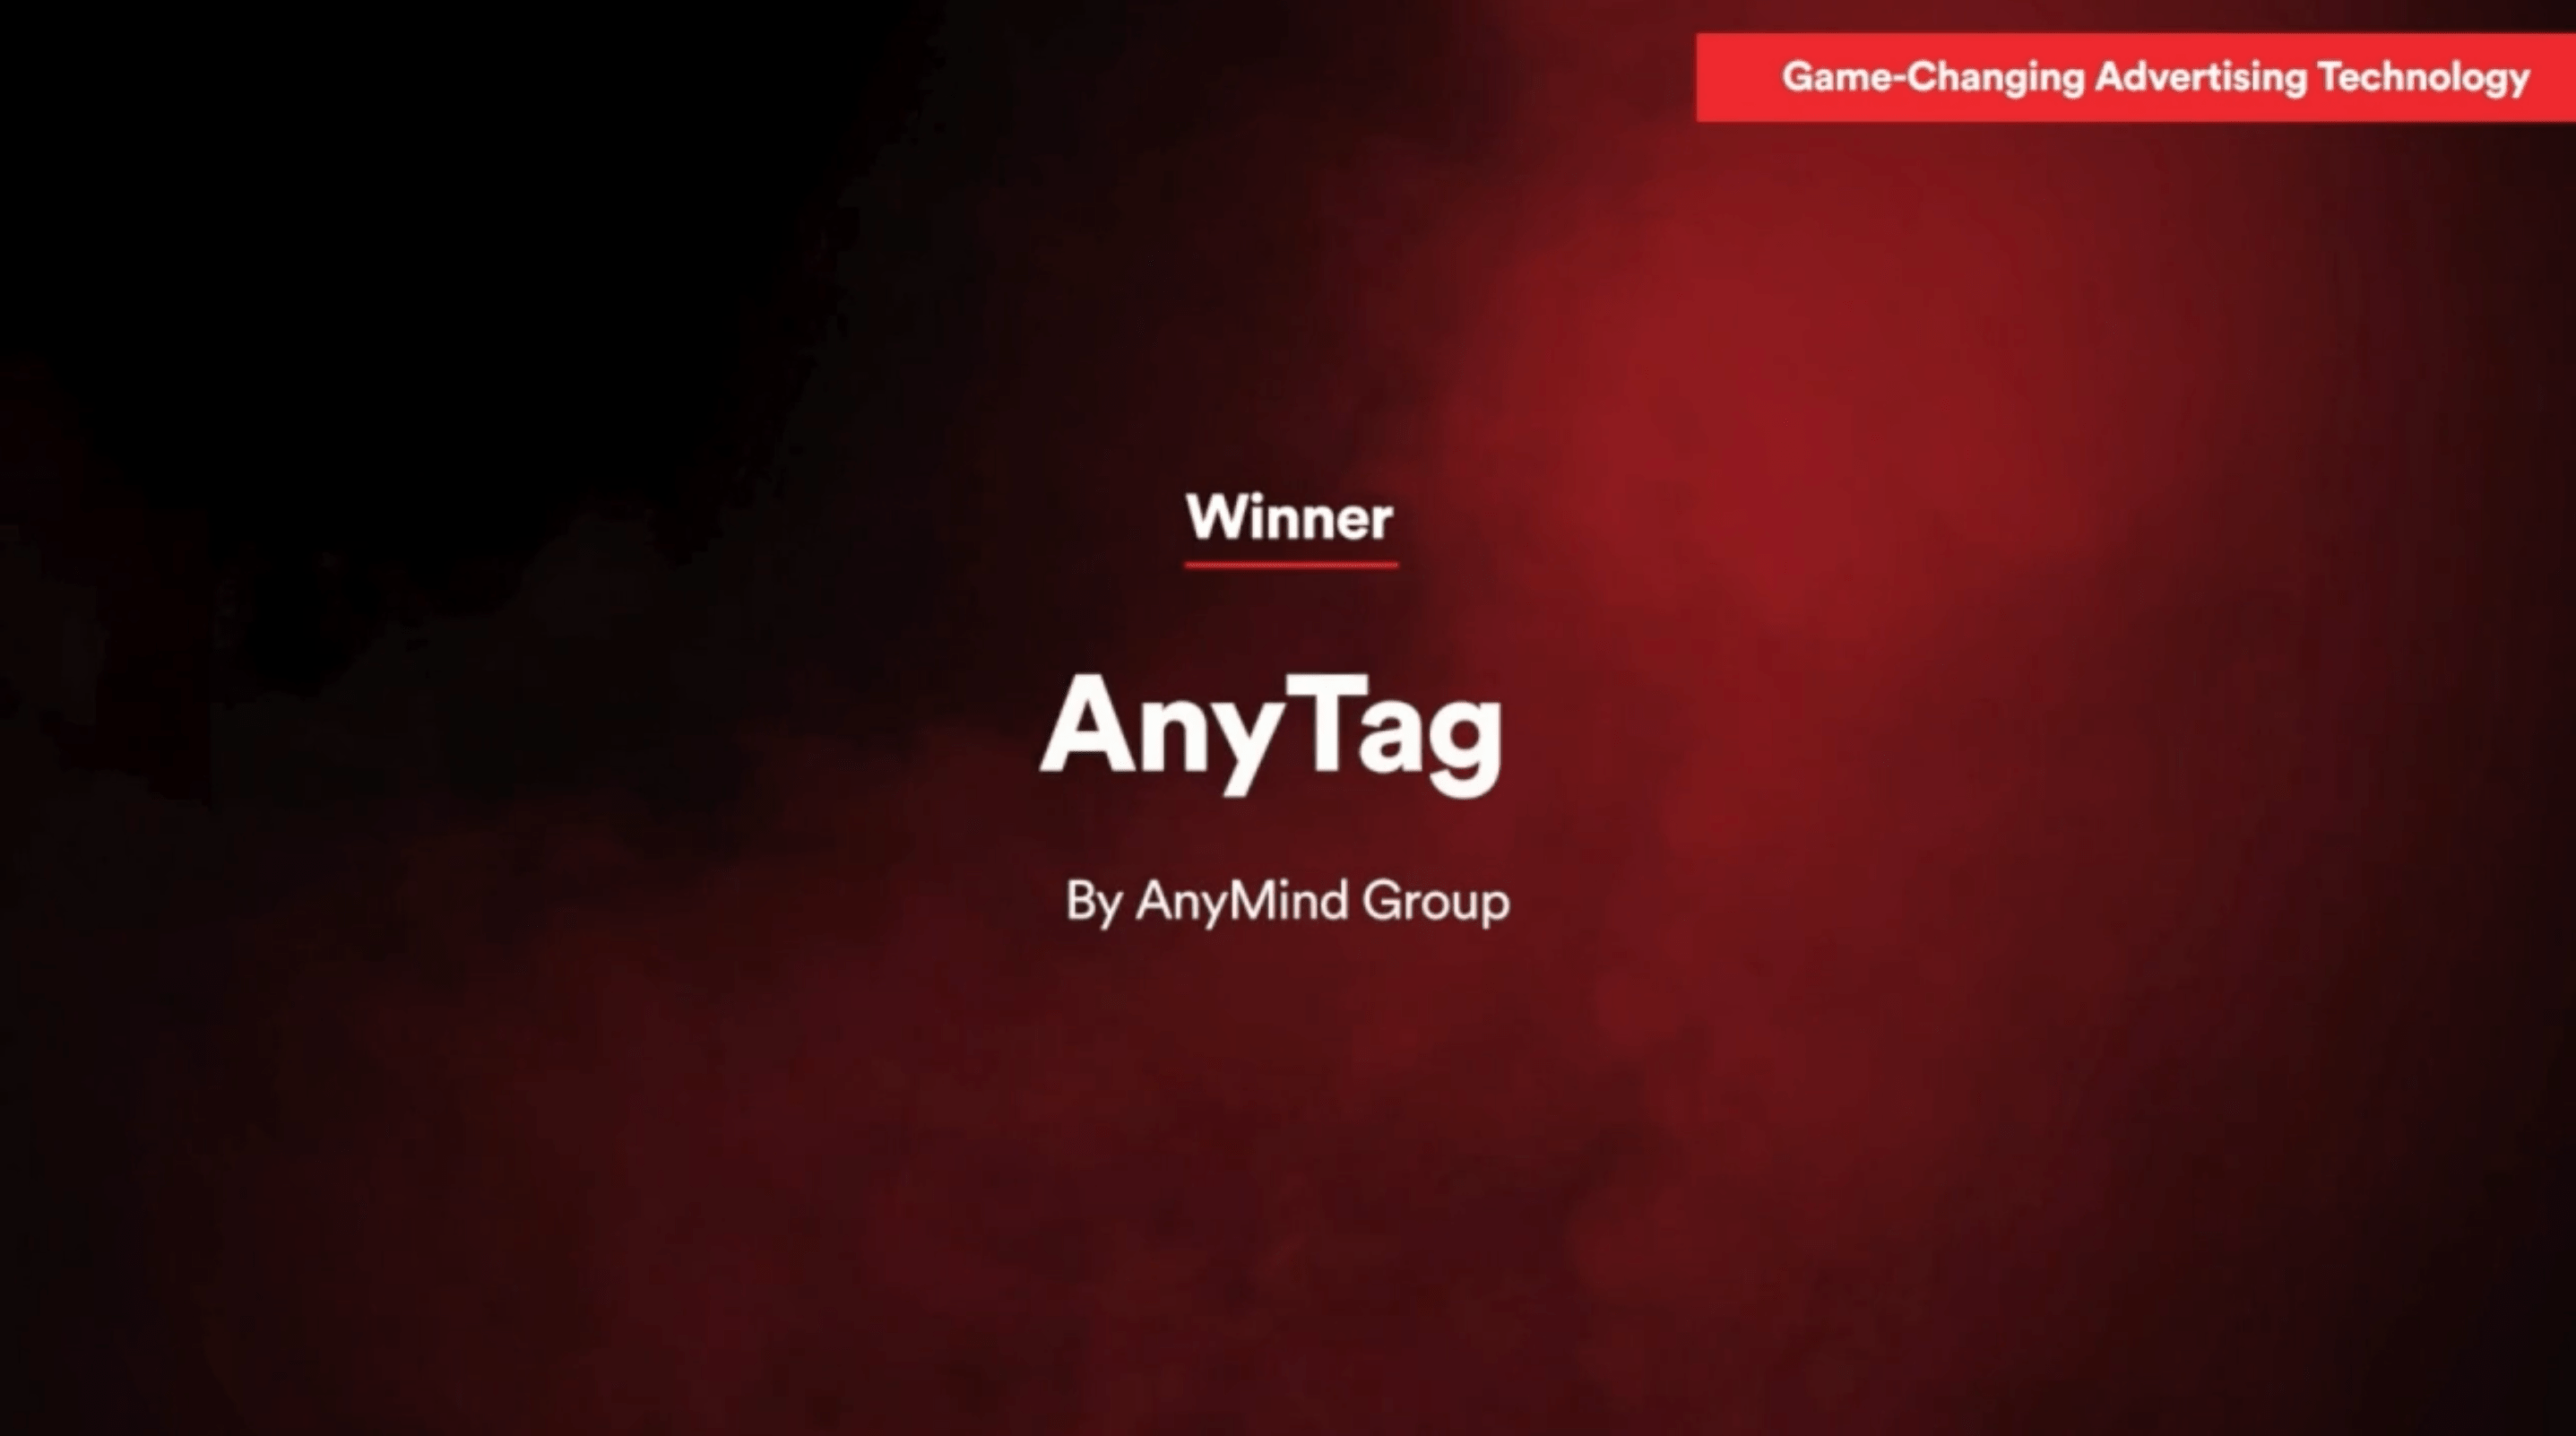 Anymind Group There S One Thing We Can Emote Right Now Our Influencermarketing Platform Anytag Came Up Tops For Game Changing Advertising Technology Cateogry In Thedrum S